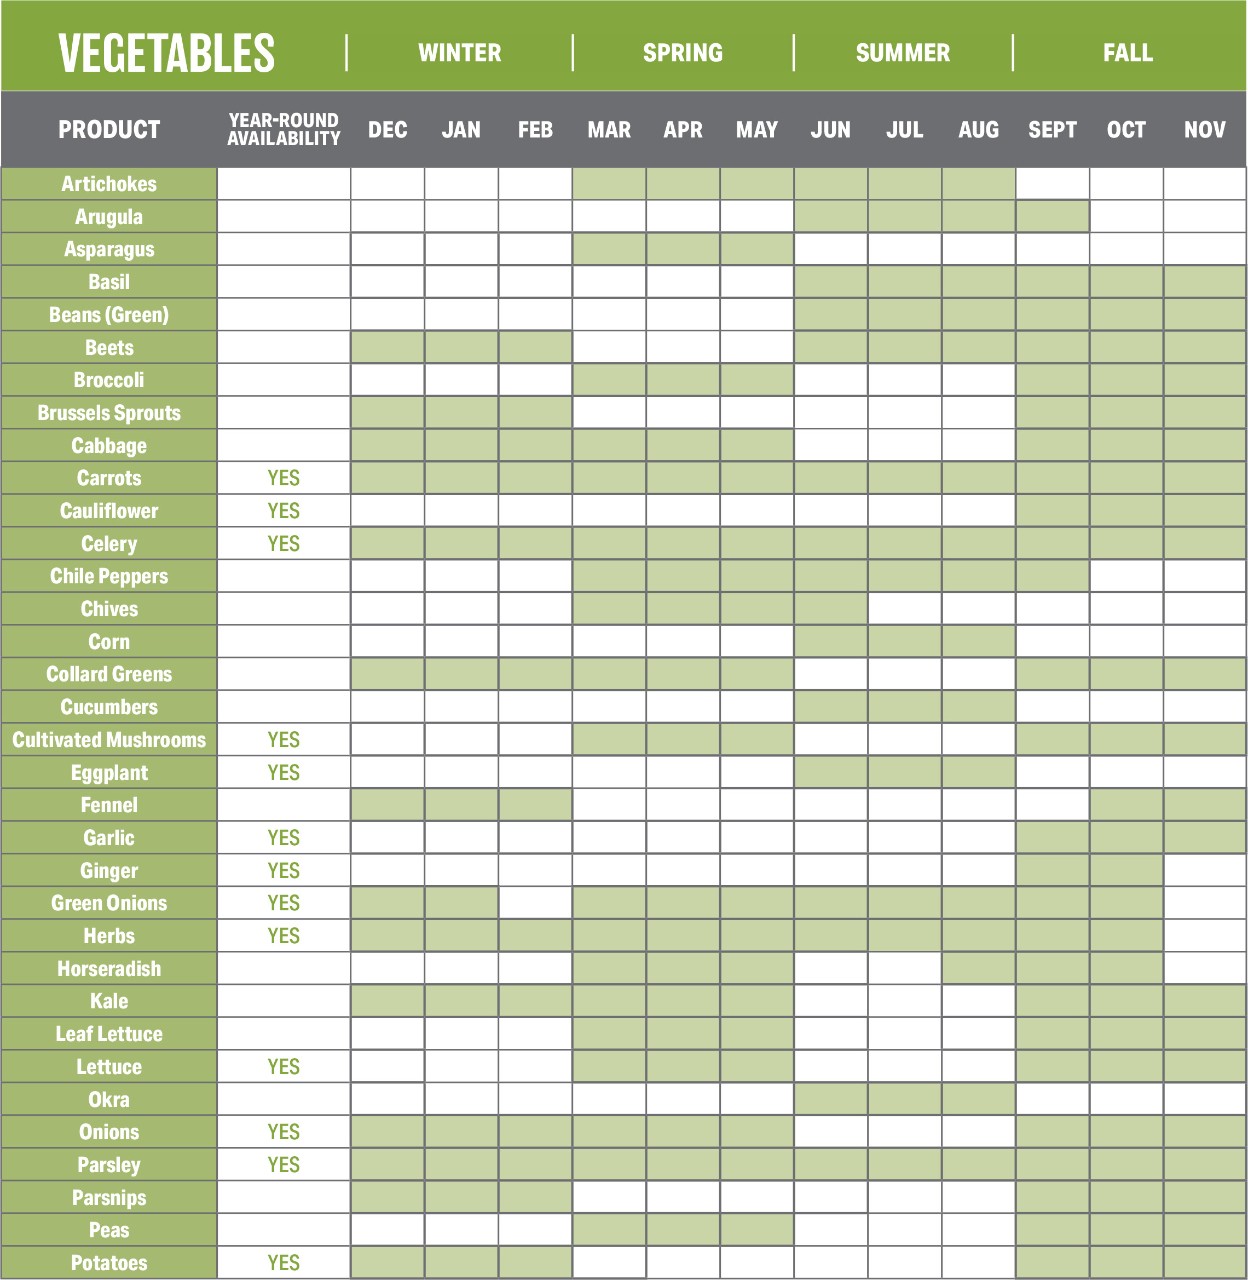 https://www.usfoods.com/content/usfoods-dce/en/great-food/great-food-resources/produce-resources/seasonal-produce-guide--fruits-and-vegetables-chart/_jcr_content/main-par/image.img.jpg/1690395992067.jpg